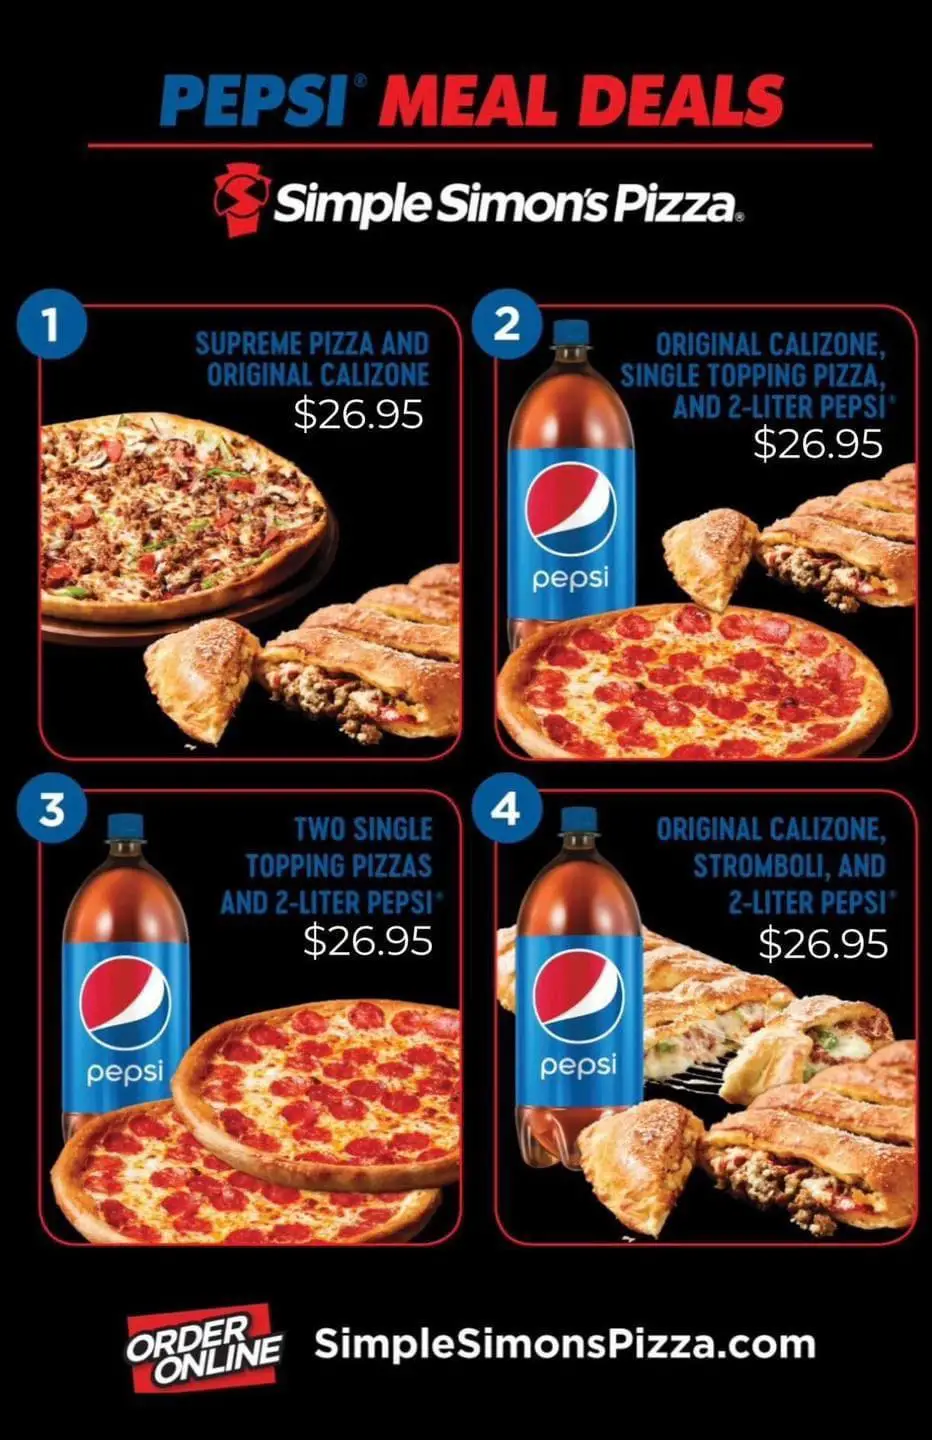 Simple Simon's Pizza National Eat What You Want Day Get Original Calizone, 1-Topping Pizza and a 2-Liter Pepsi for $26.95